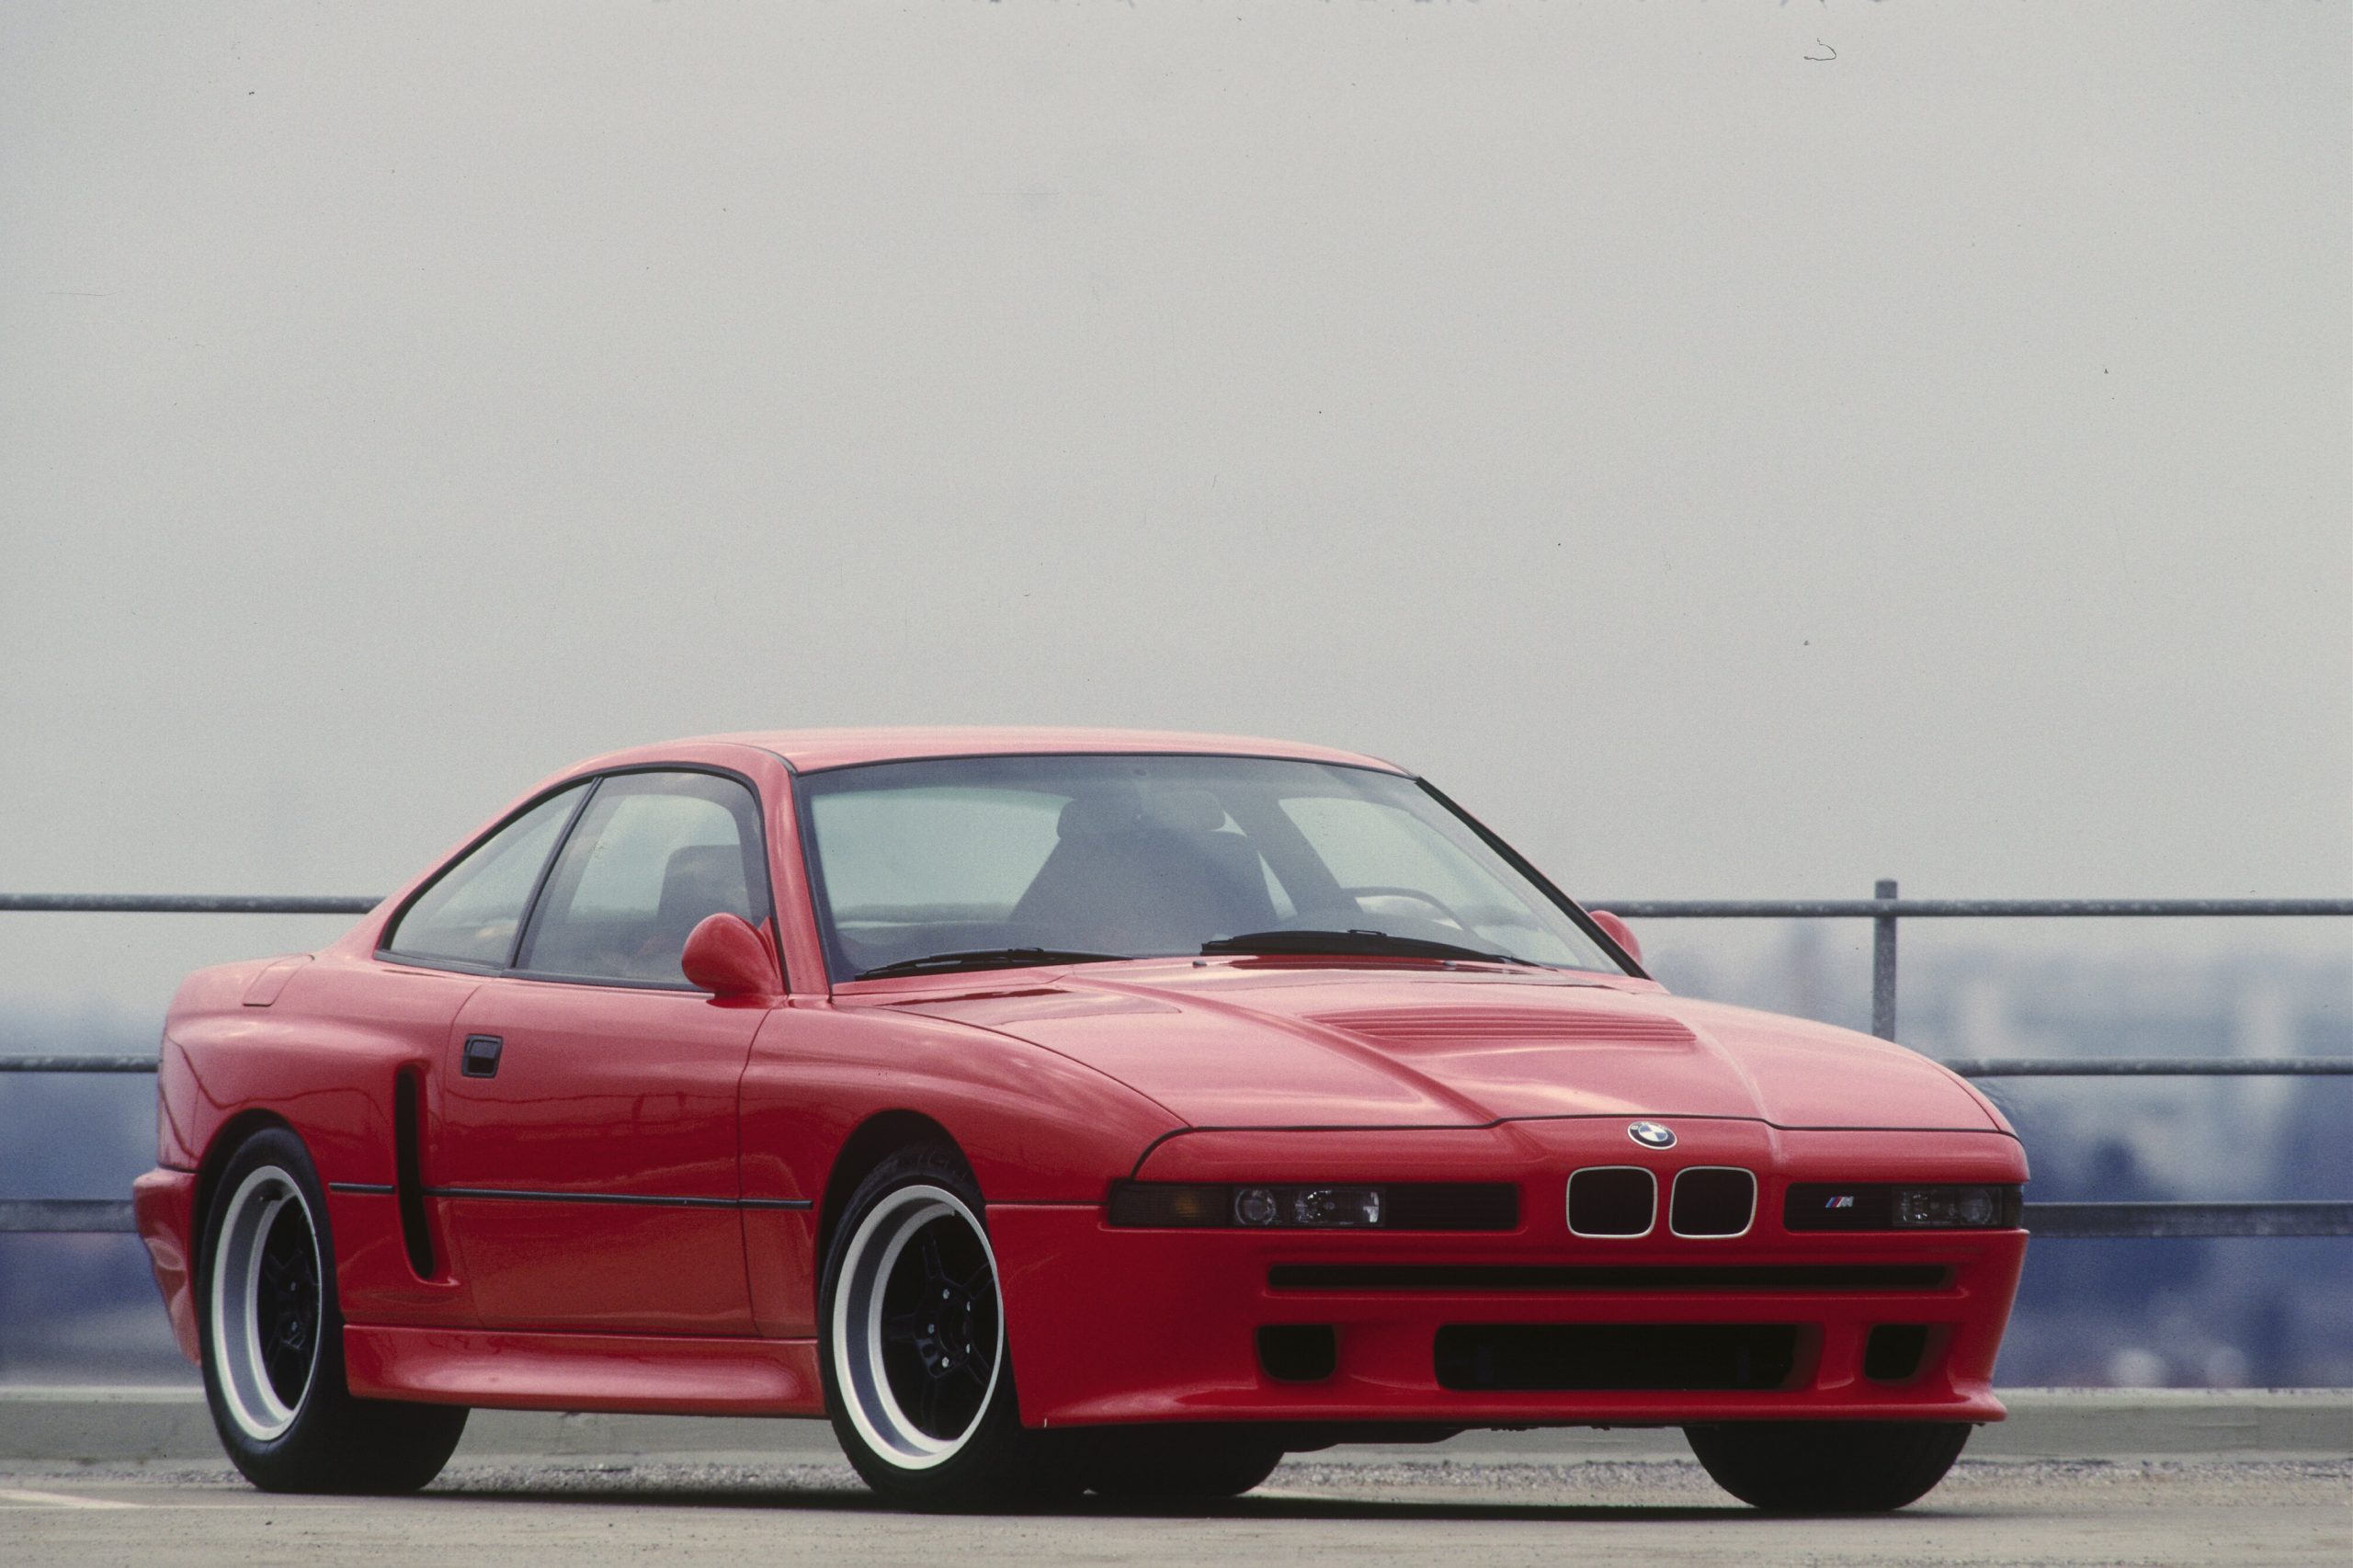 A 3/4 front view of the red E31 BMW M8 prototype.